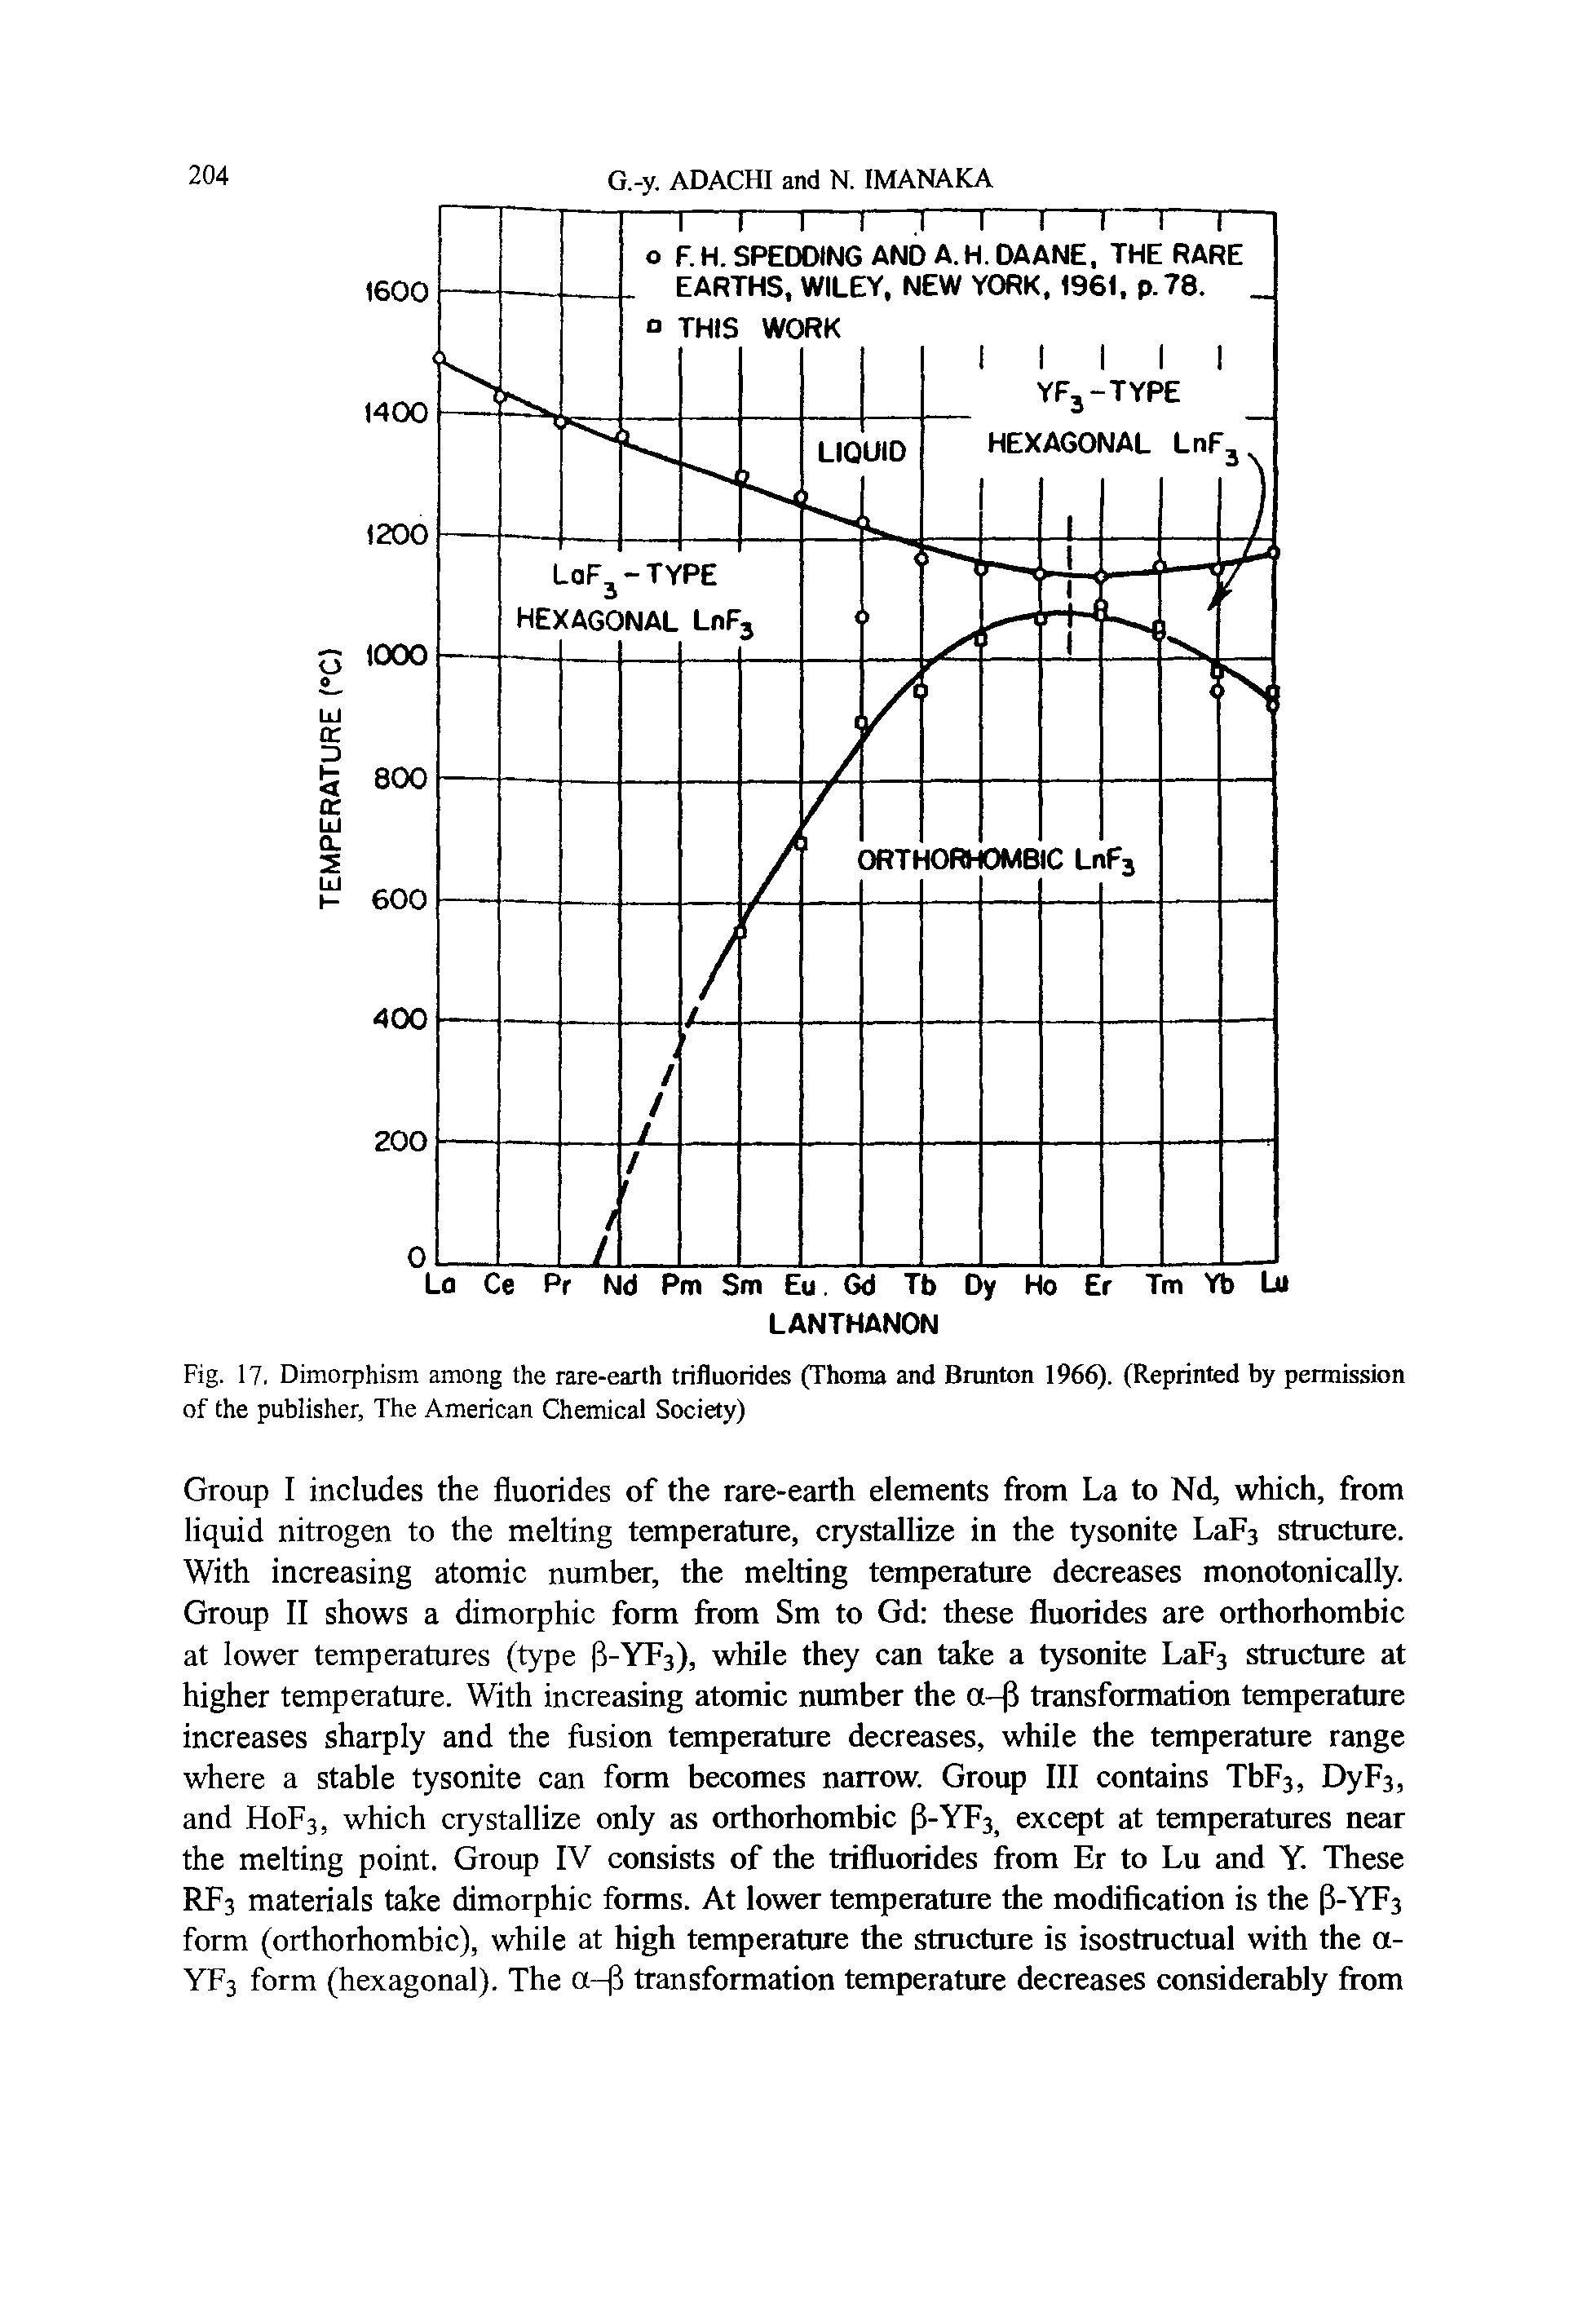 Fig. 17. Dimorphism among the rare-earth trifluorides (Thoma and Brunton 1966). (Reprinted by permission of the publisher. The American Chemical Society)...